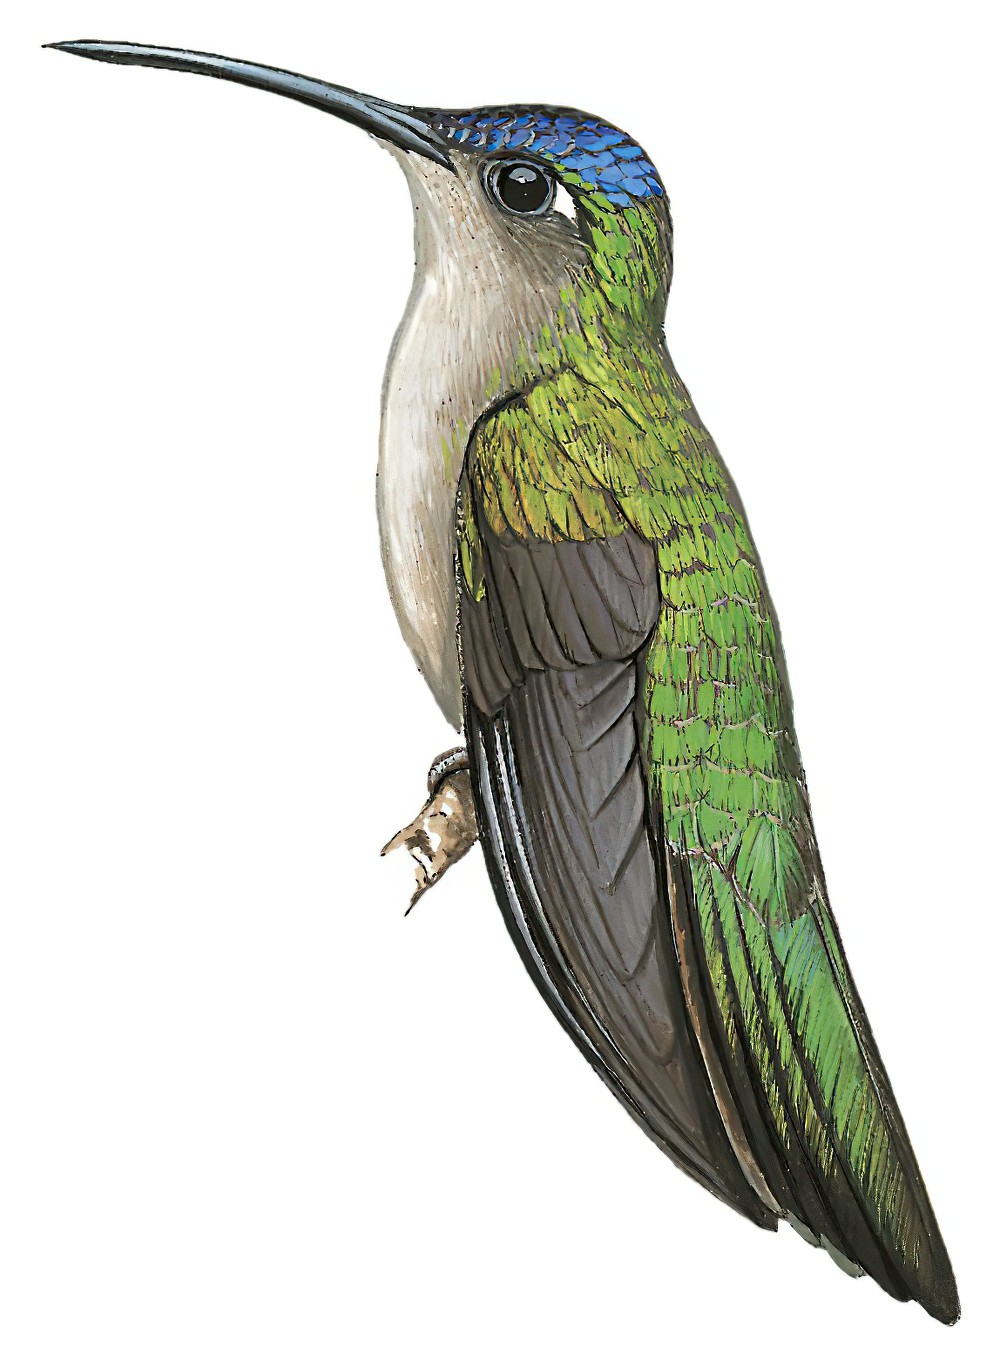 Wedge-tailed Sabrewing / Campylopterus curvipennis